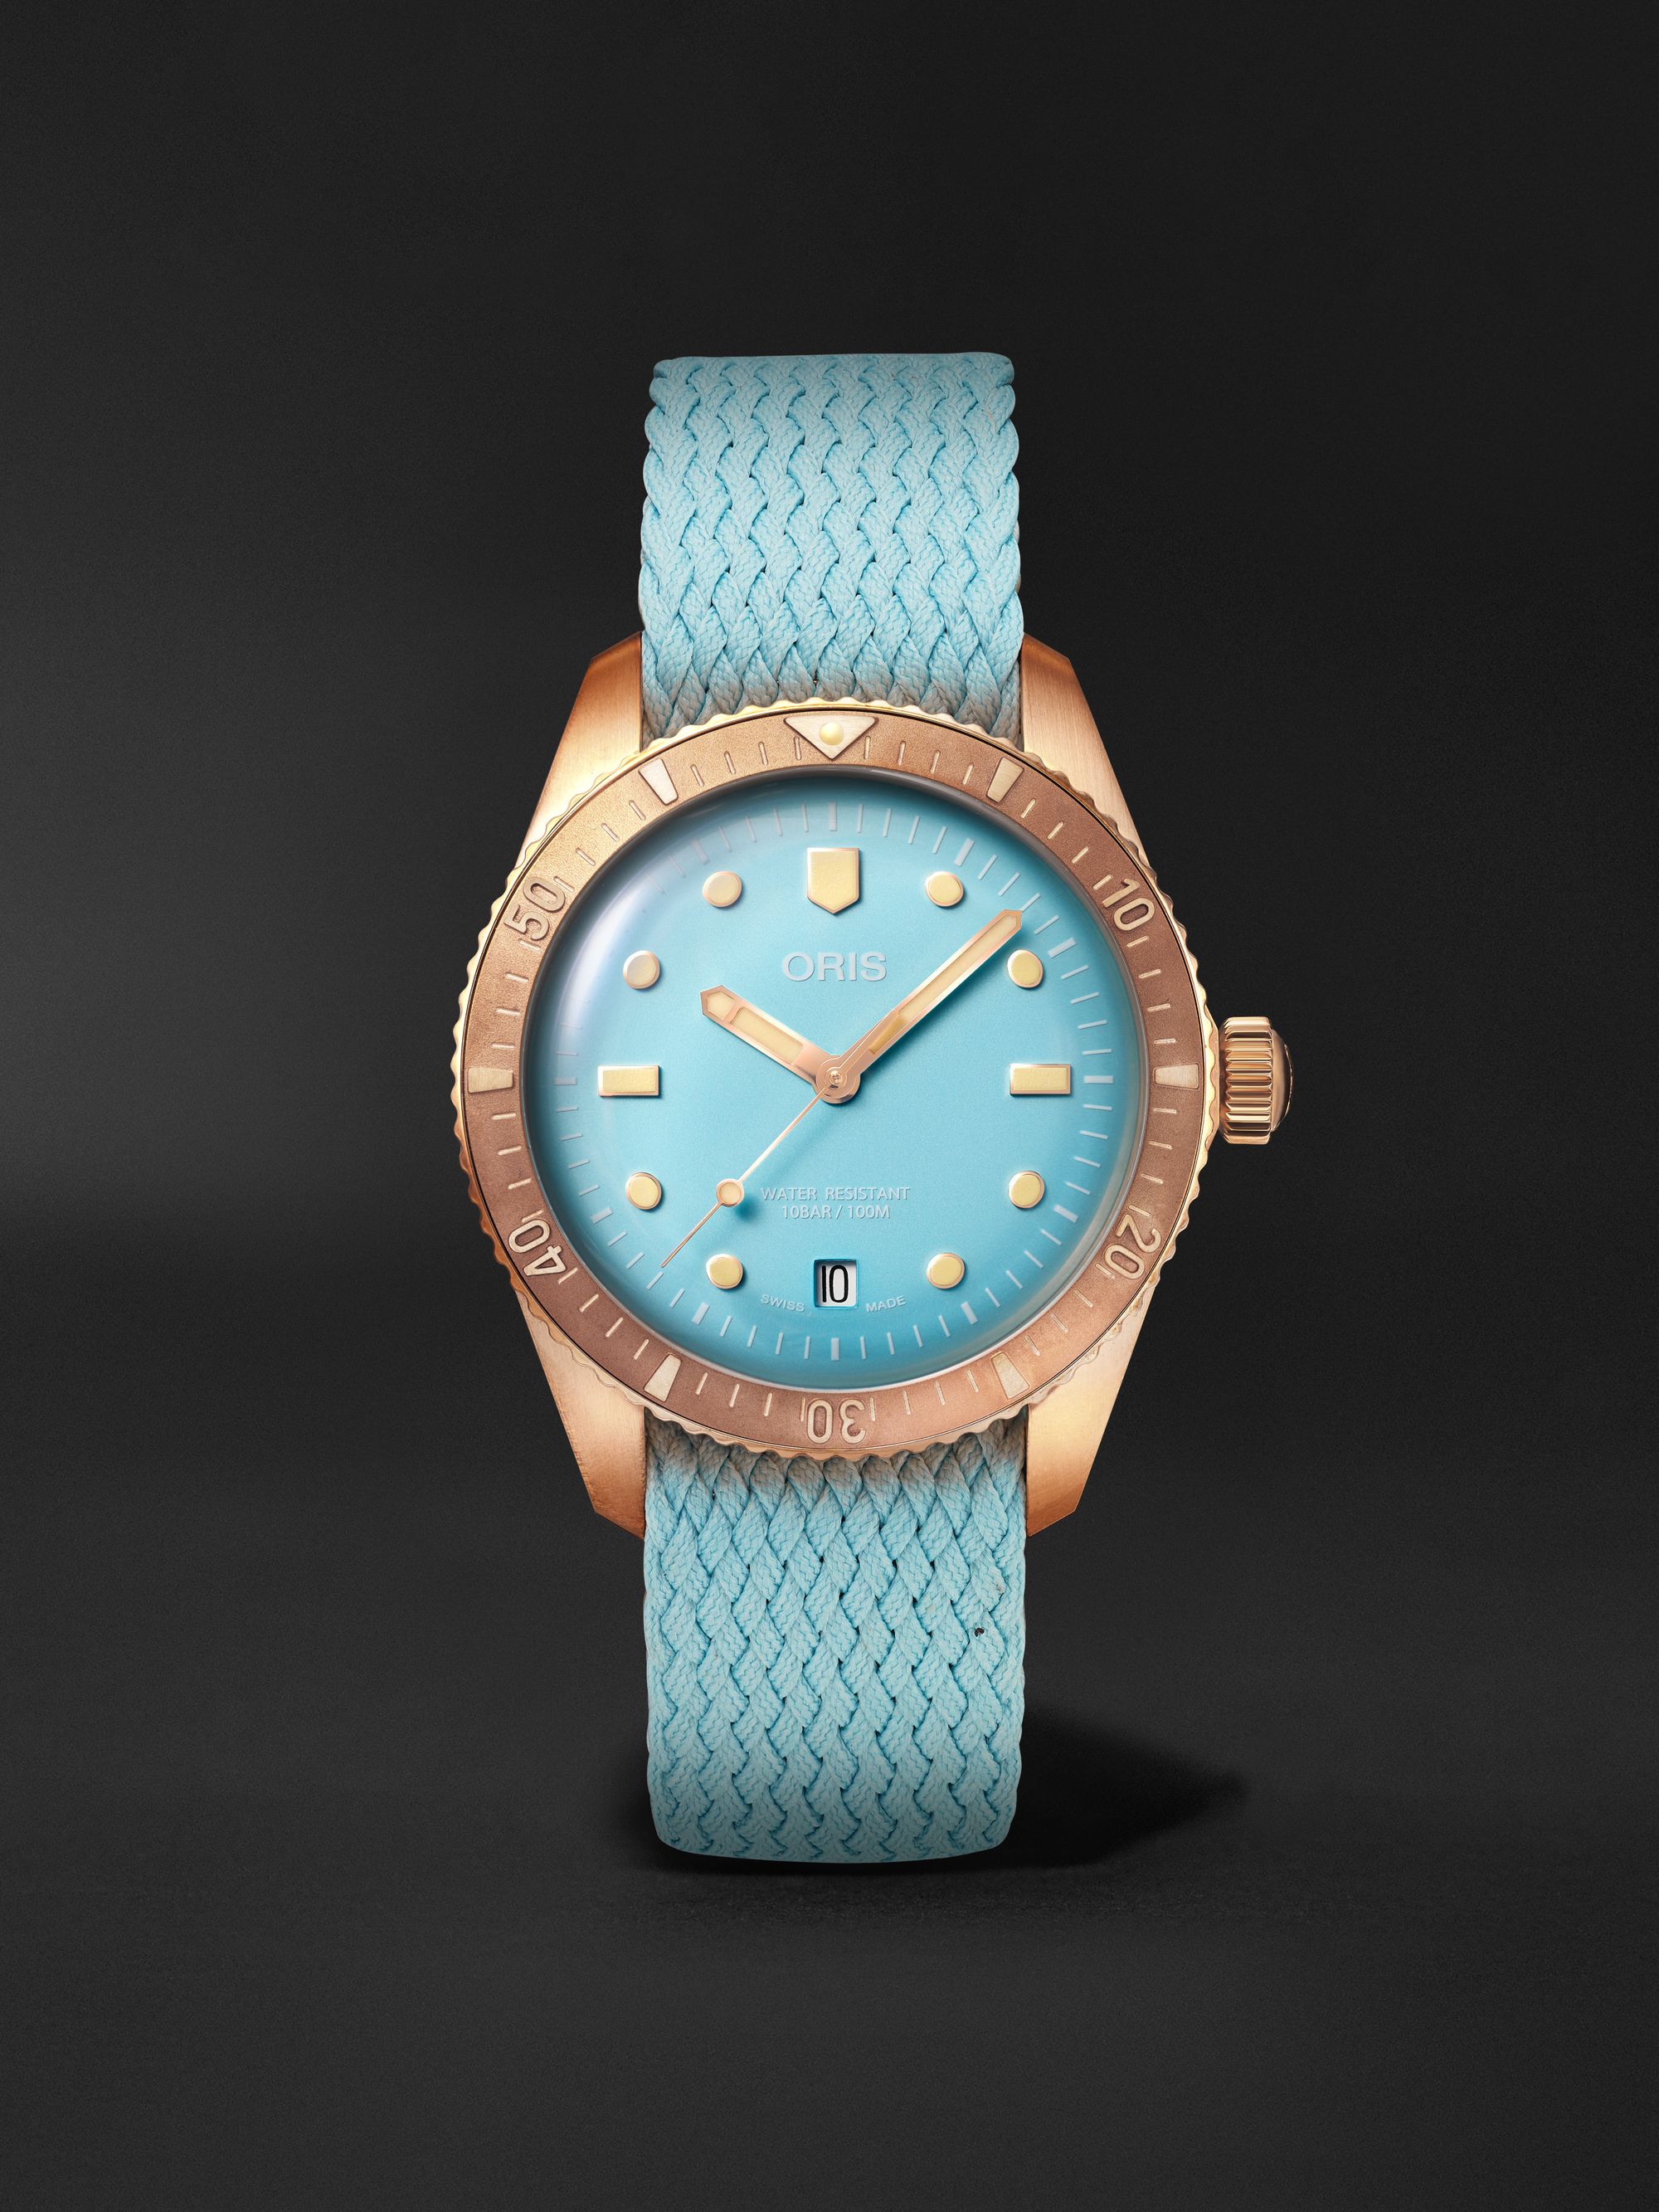 ORIS Divers Sixty-Five Automatic 38mm Bronze and Recycled-Perlon Watch, Ref. No. 01 733 7771 3155-07 3 19 02BR